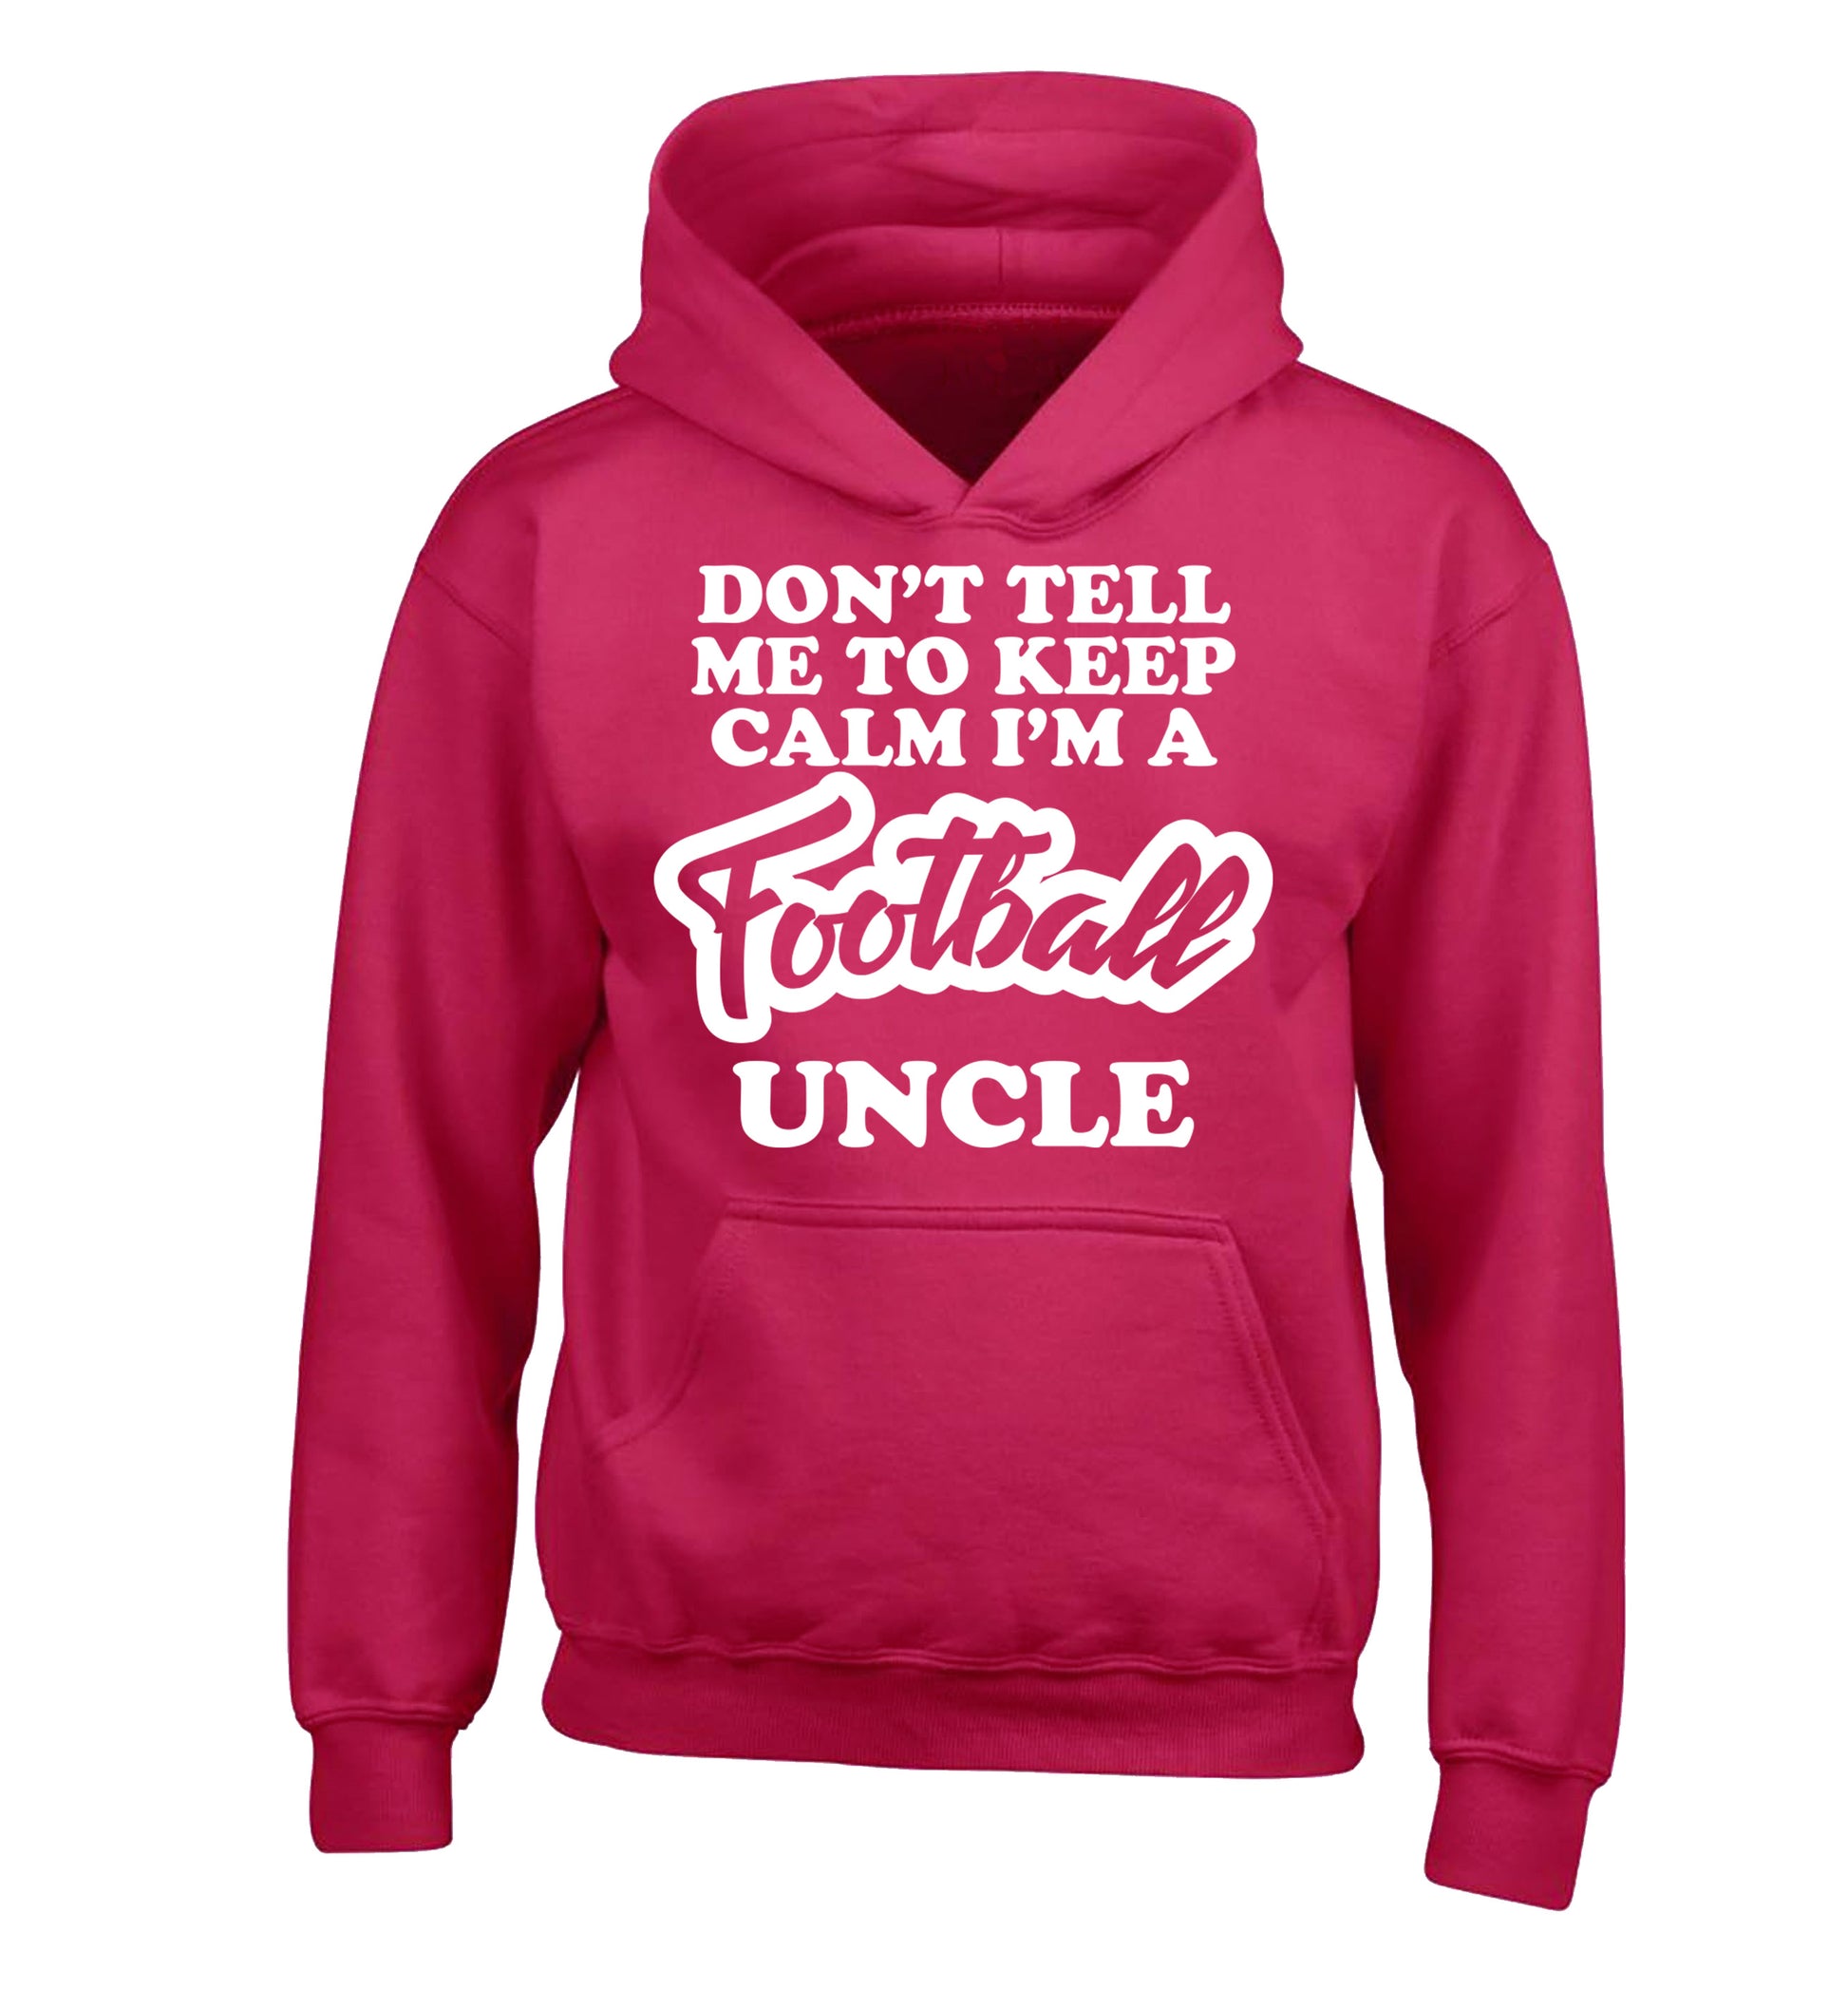 Don't tell me to keep calm I'm a football uncle children's pink hoodie 12-14 Years